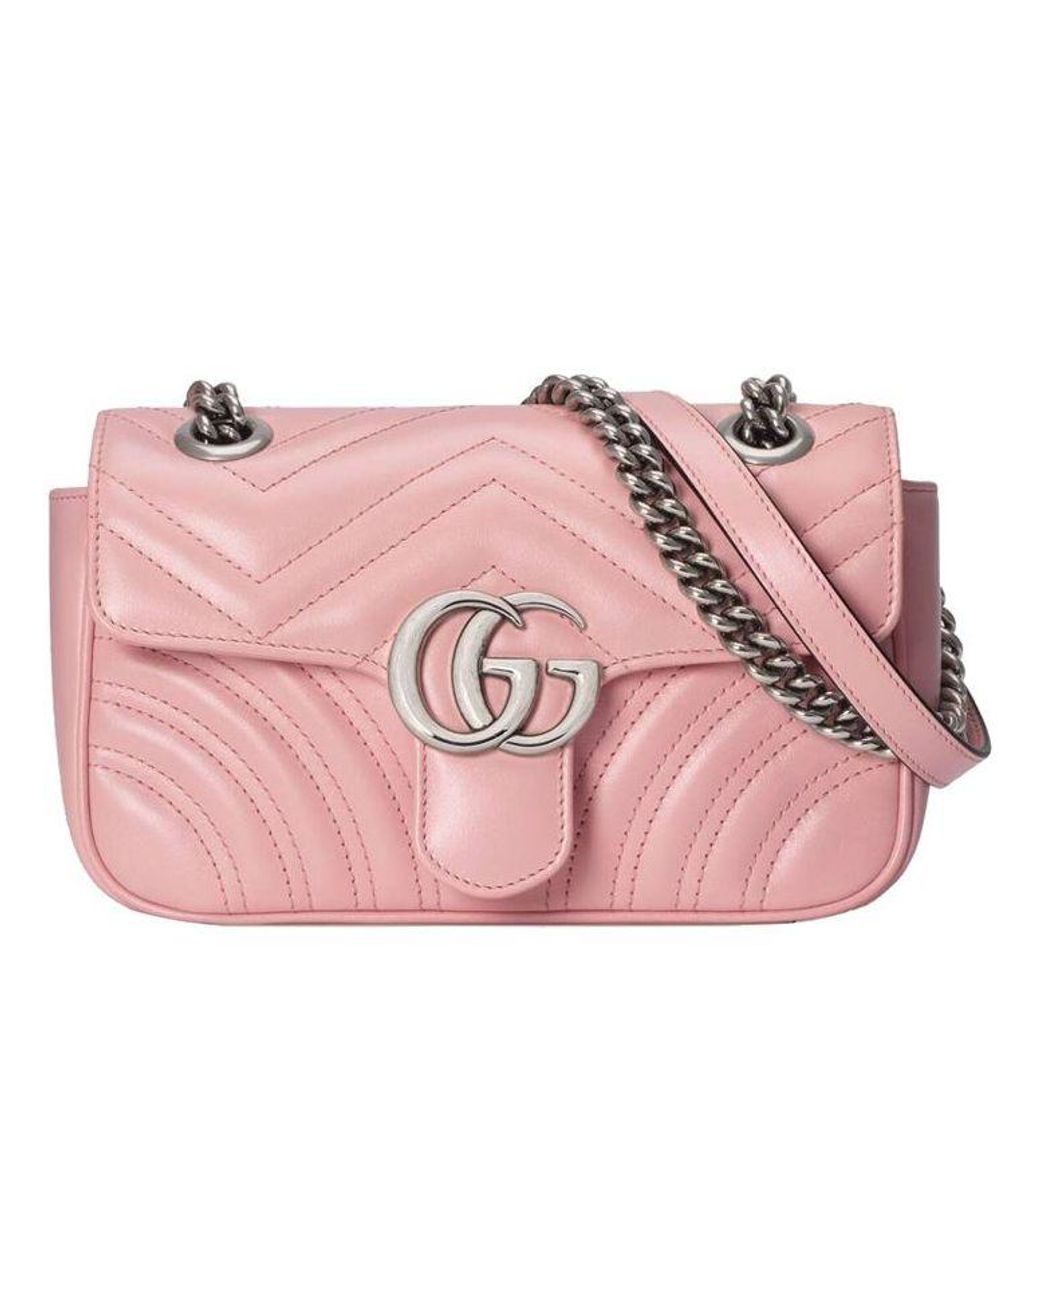 GG Marmont half-moon-shaped mini bag in dusty pink